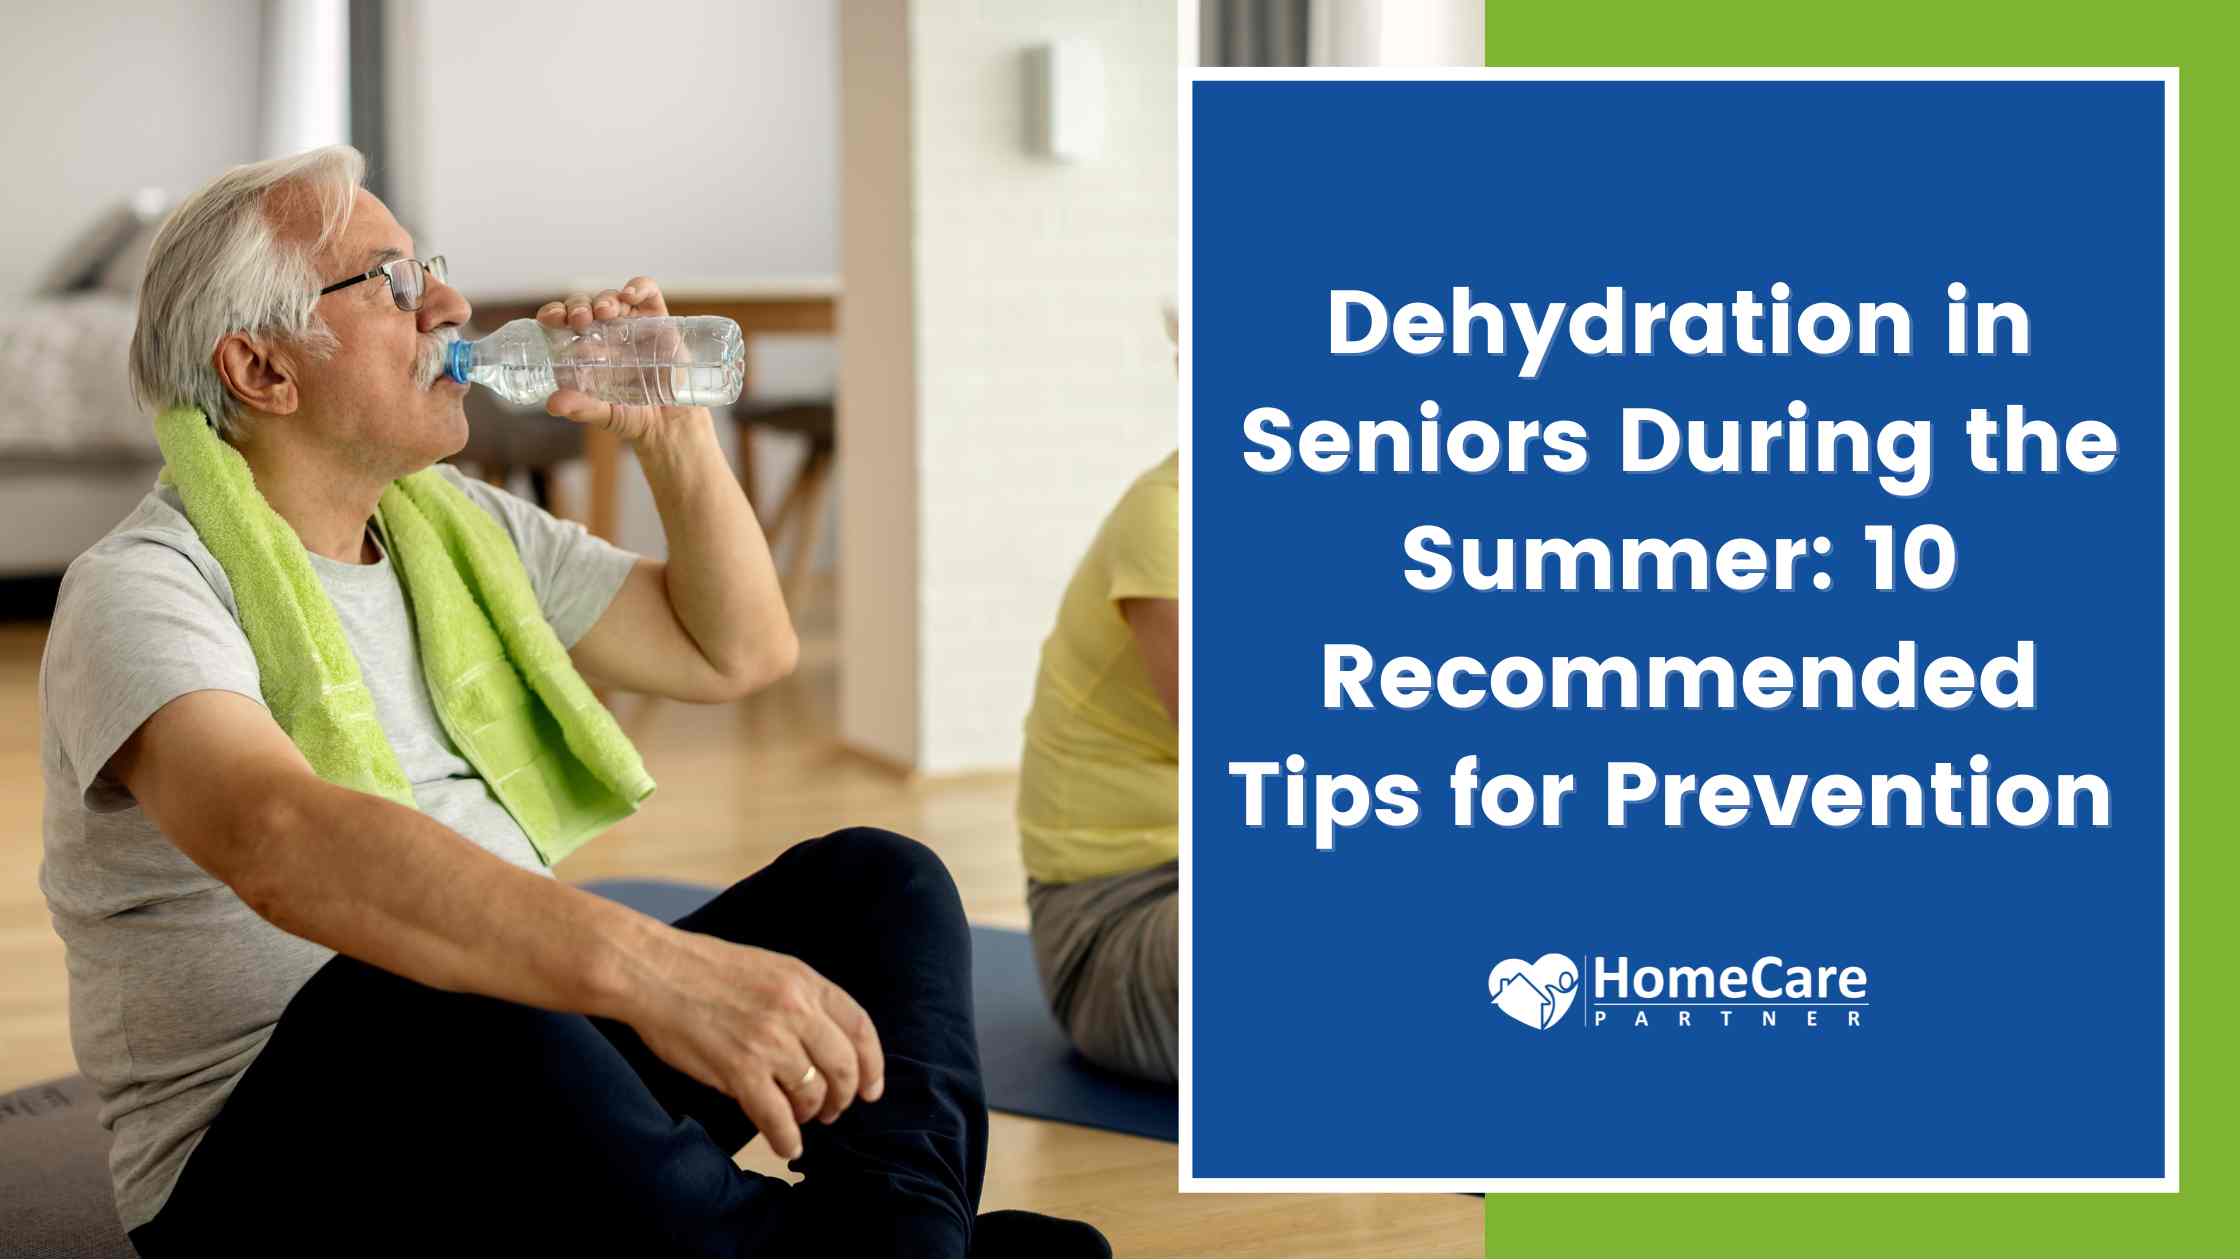 Dehydration in Seniors During the Summer: 10 Recommended Tips for Prevention 